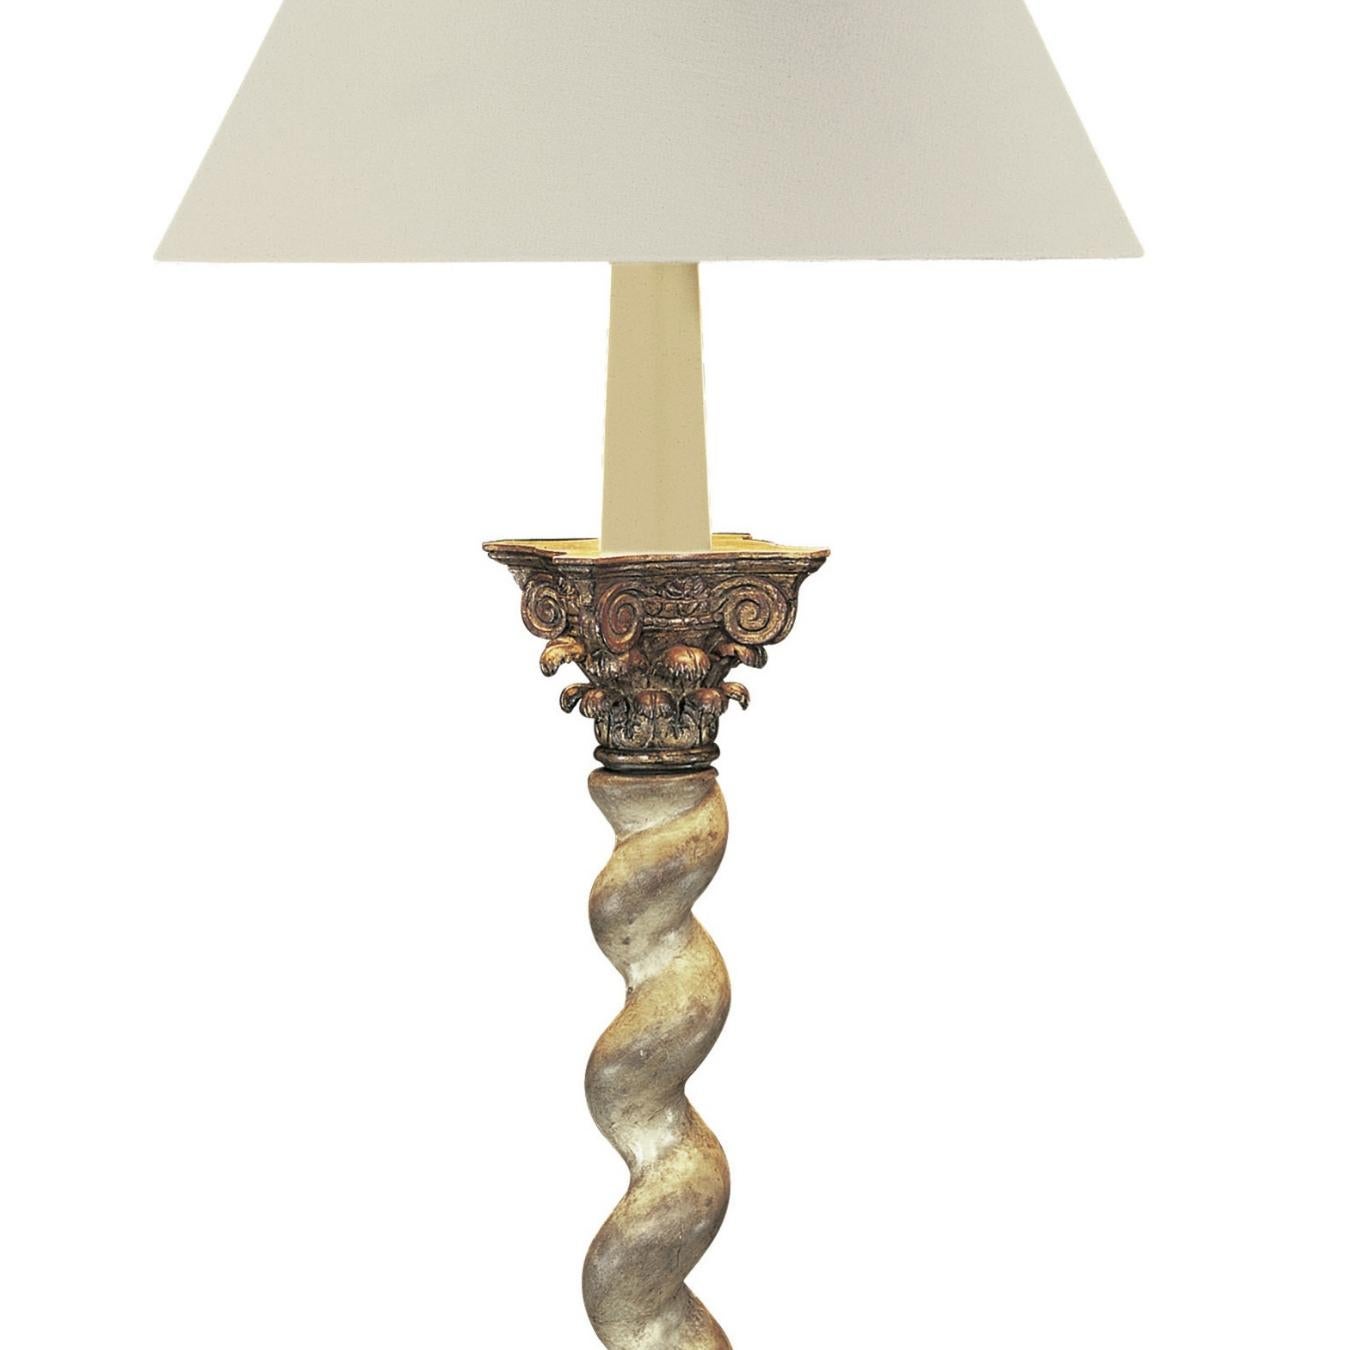 Wood Salomonic Twist Lamp Inspired by Columns with Twisted Shaft & Corinthian Capital For Sale